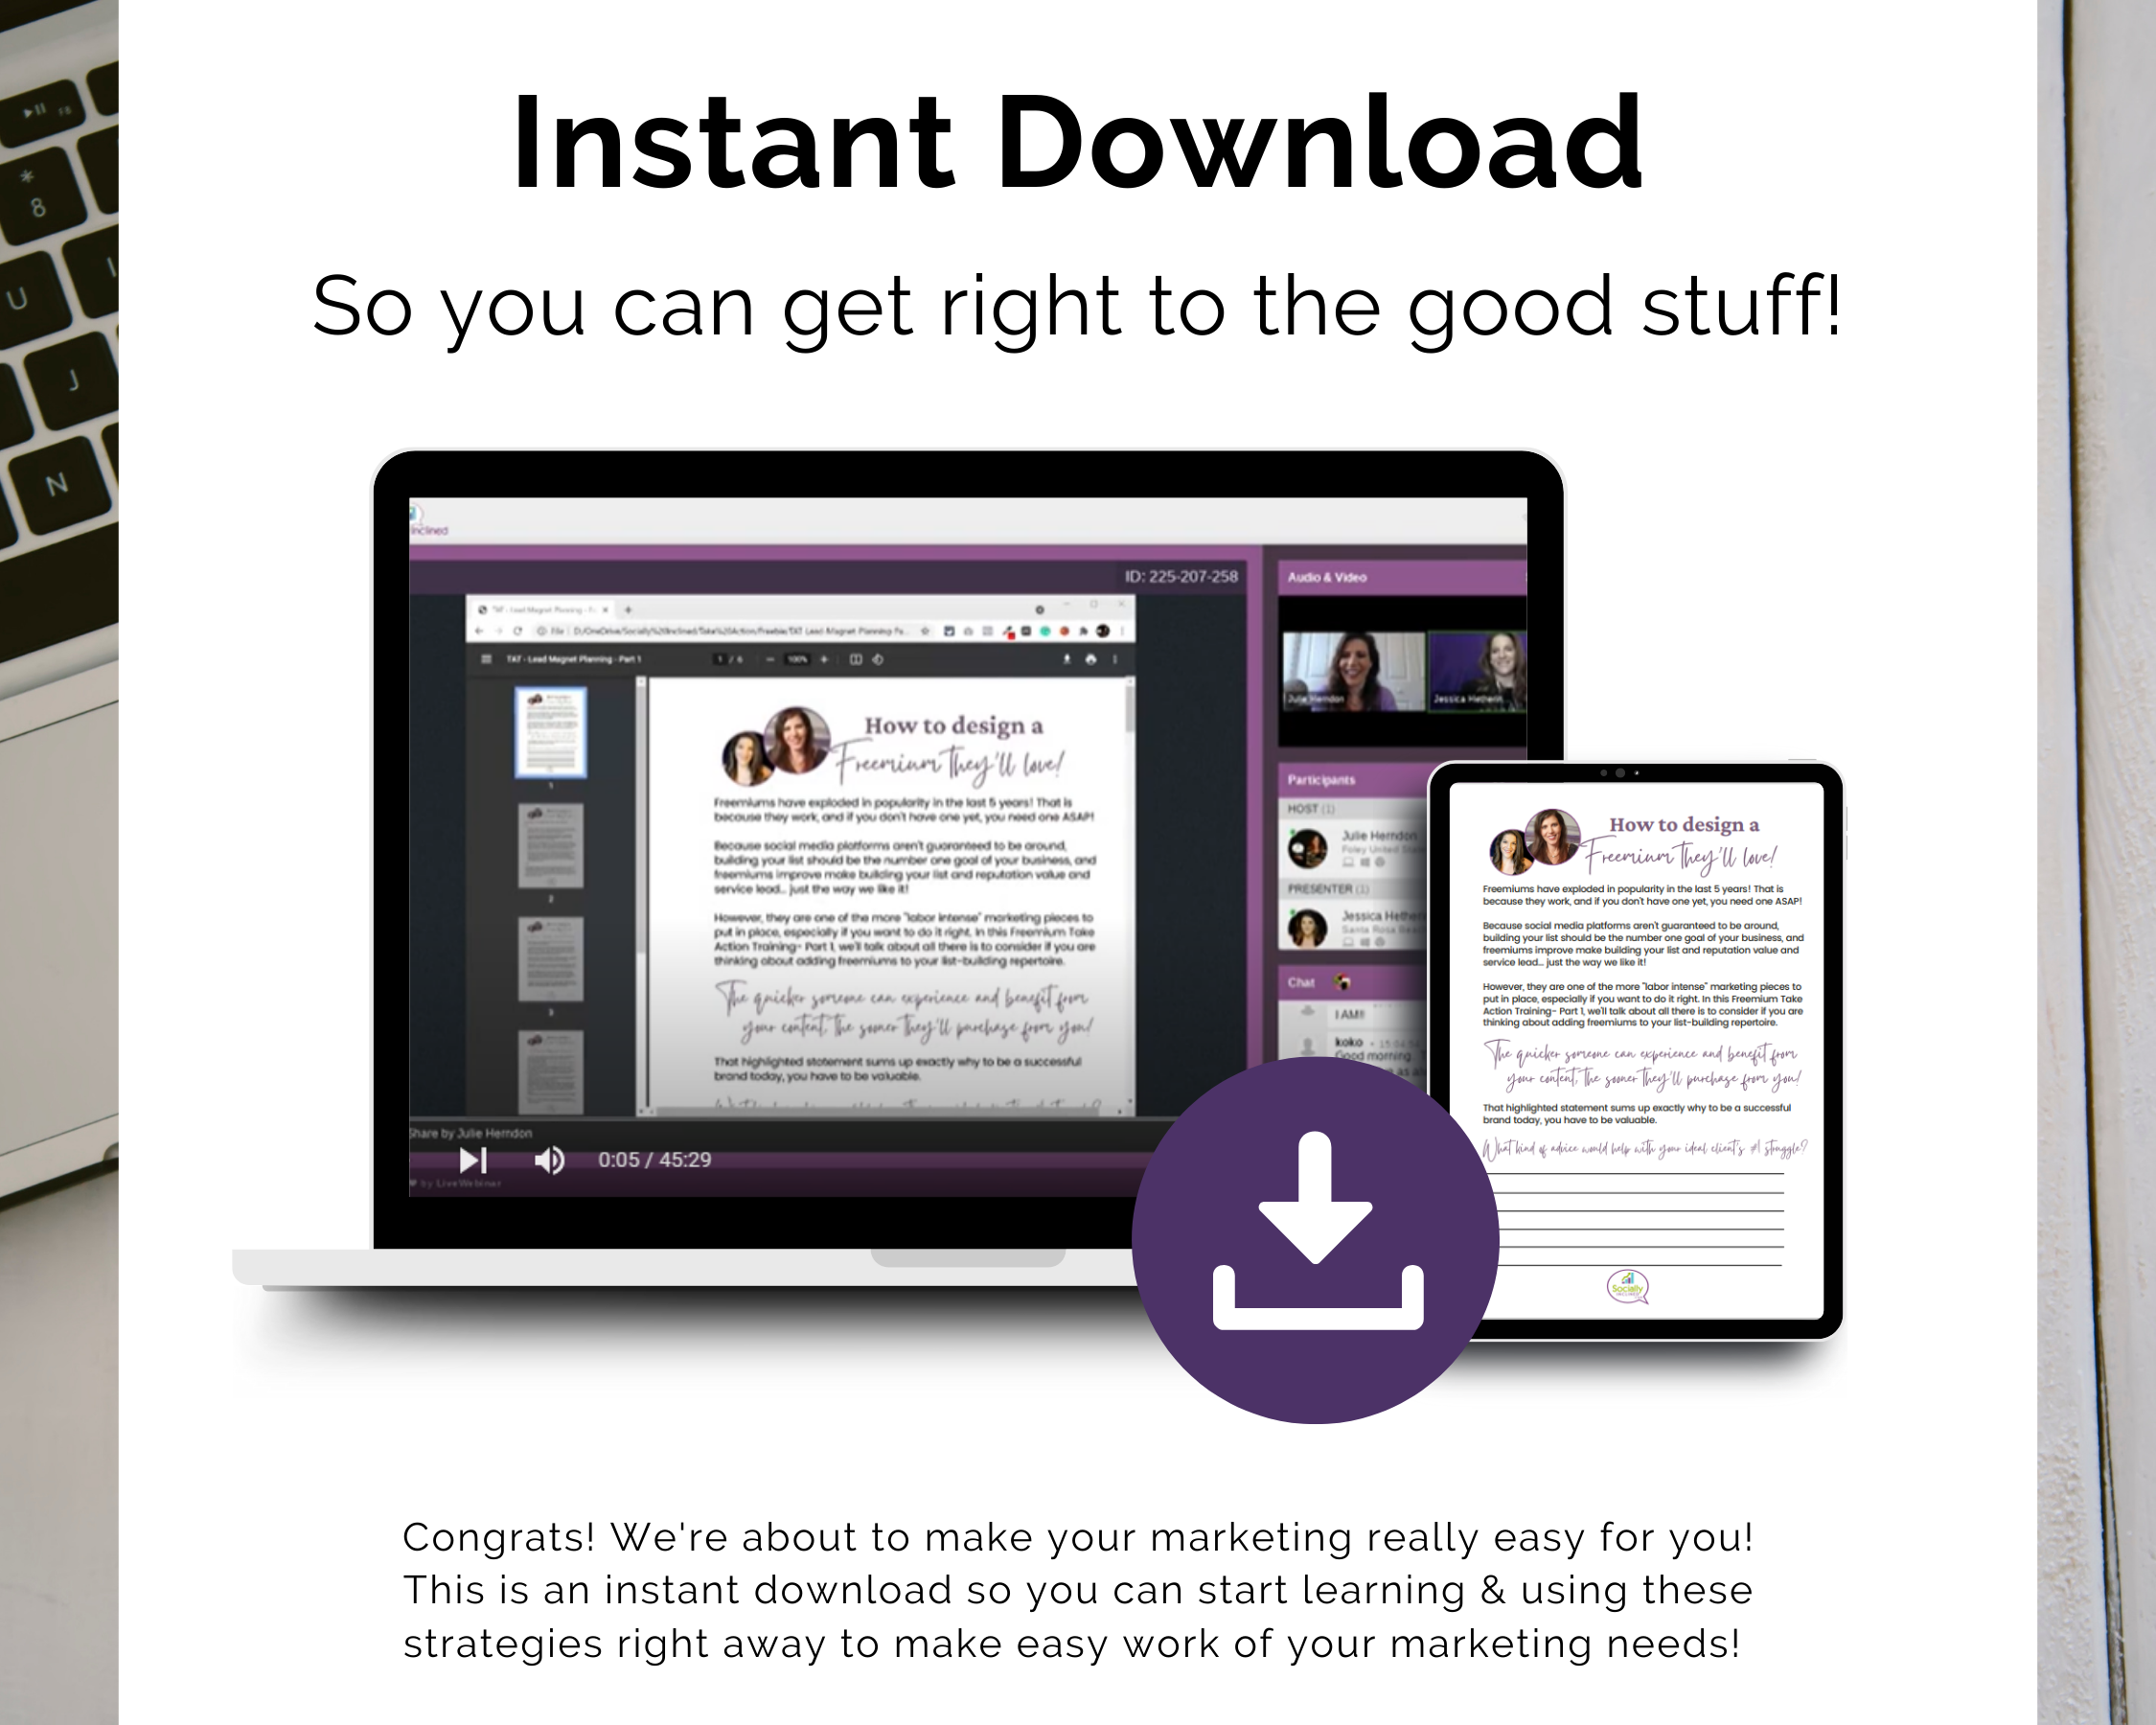 Instant download of the TAT - Lead Magnet - Freebie Planning Masterclass by Get Socially Inclined for quick access to the content.